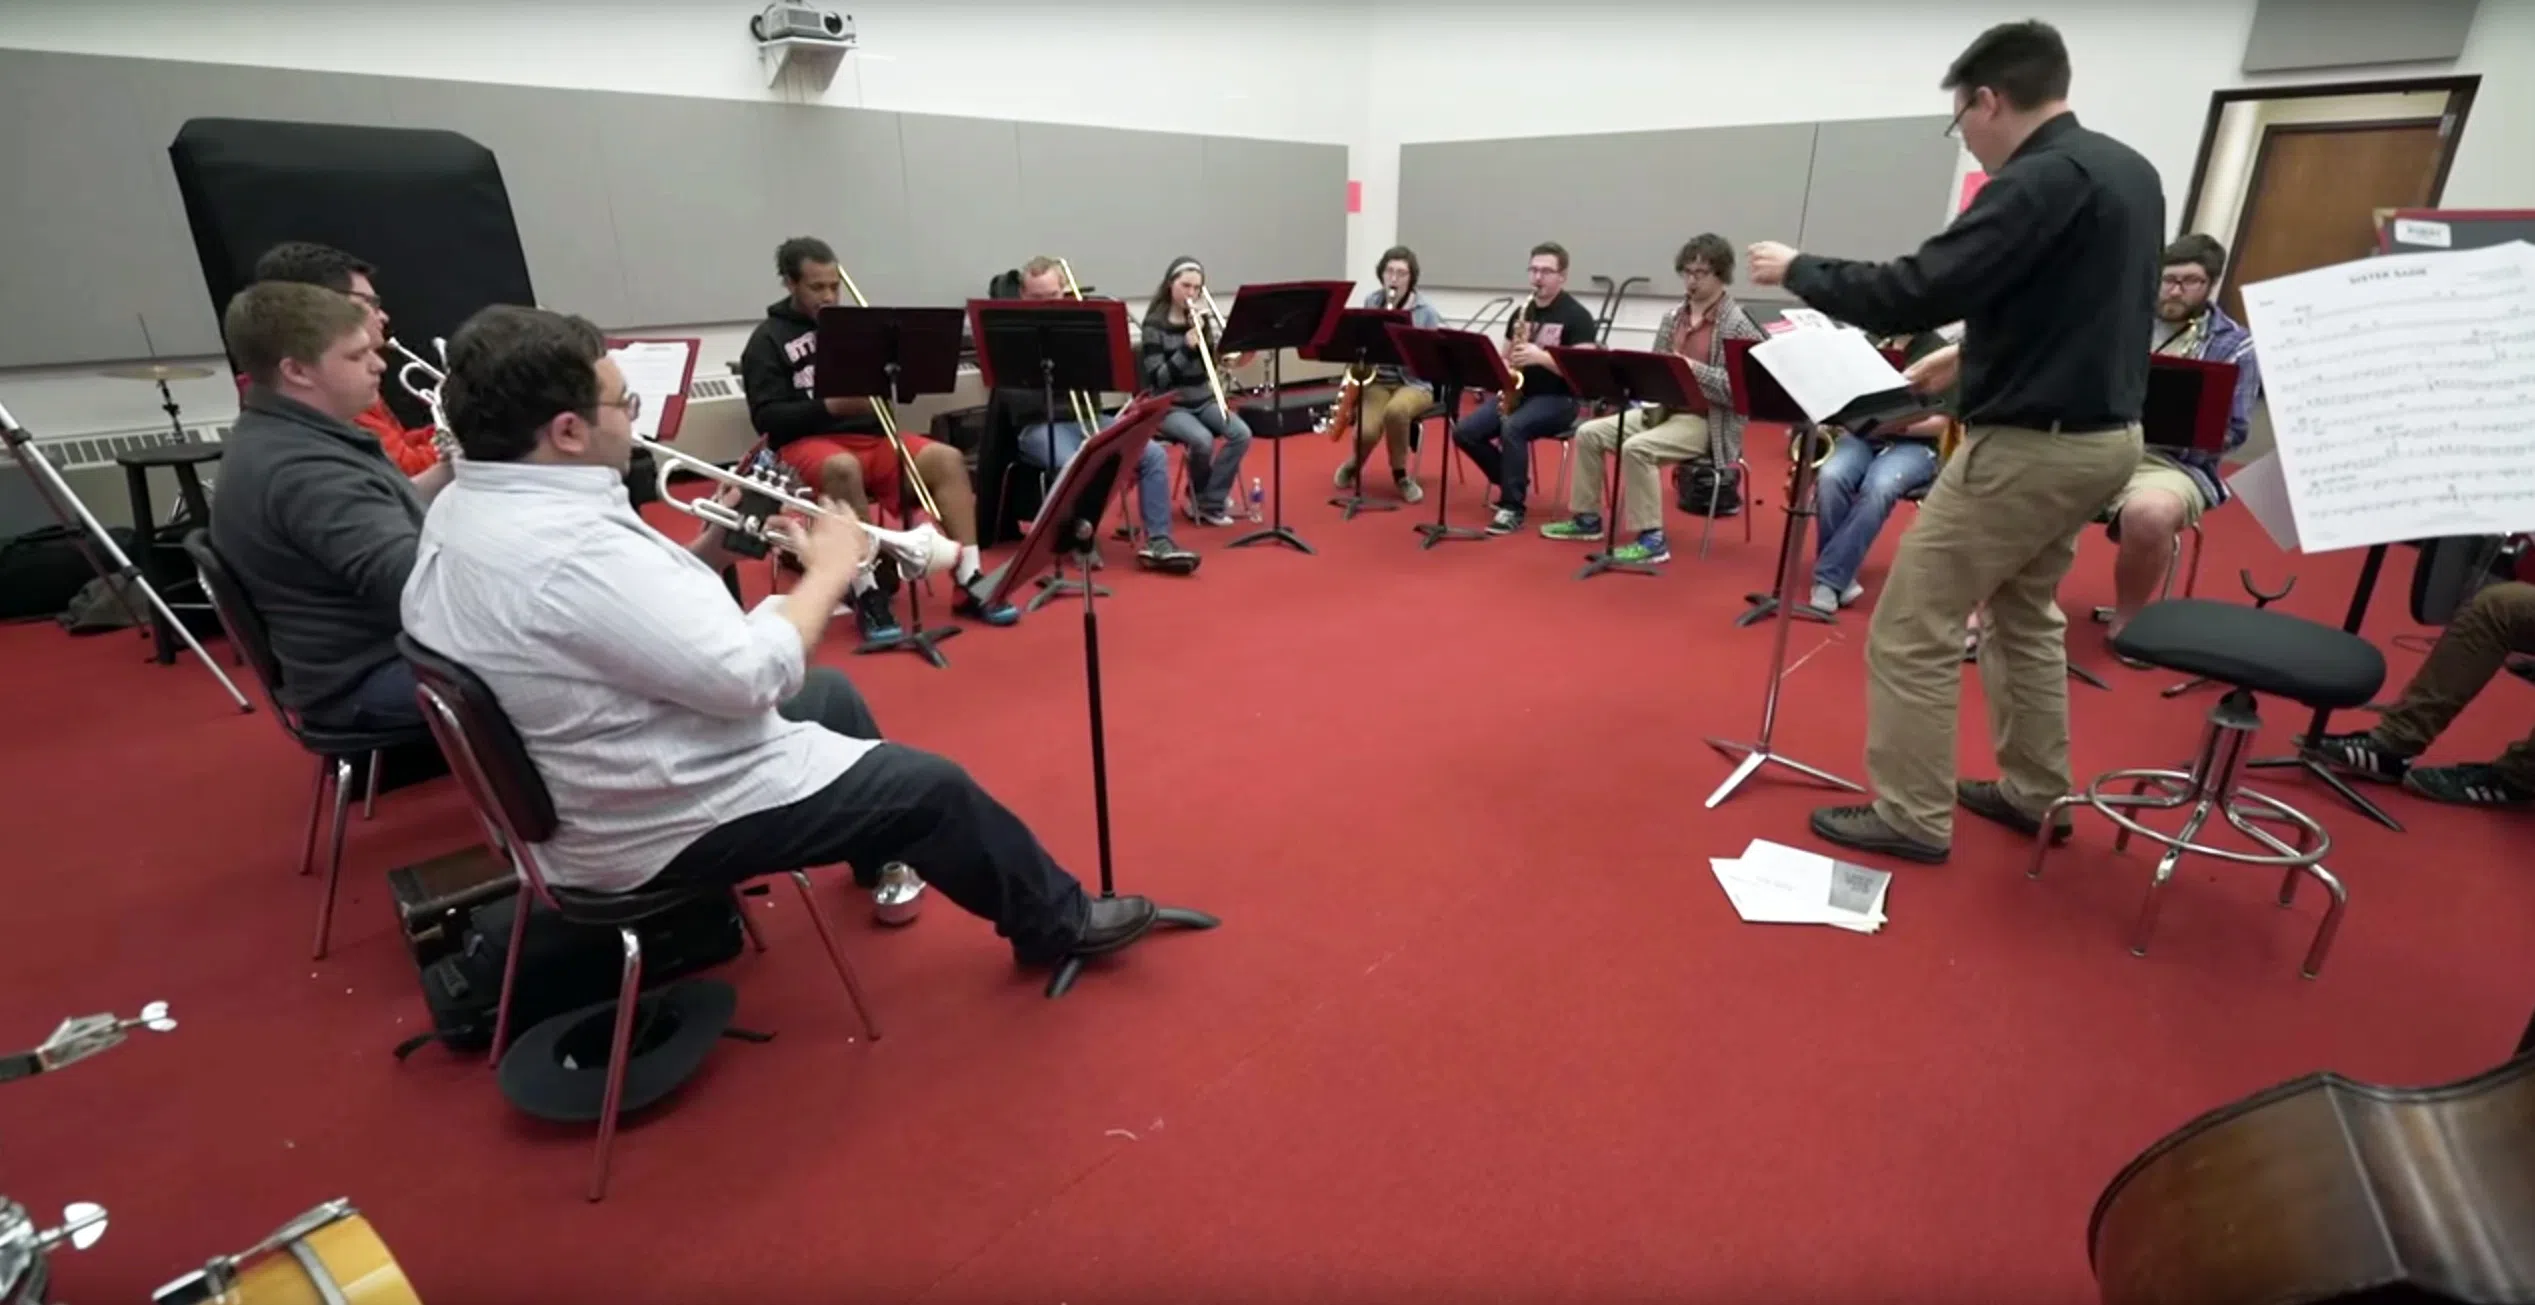 A group ensemble practicing together in a room with a red carpet and white walls.